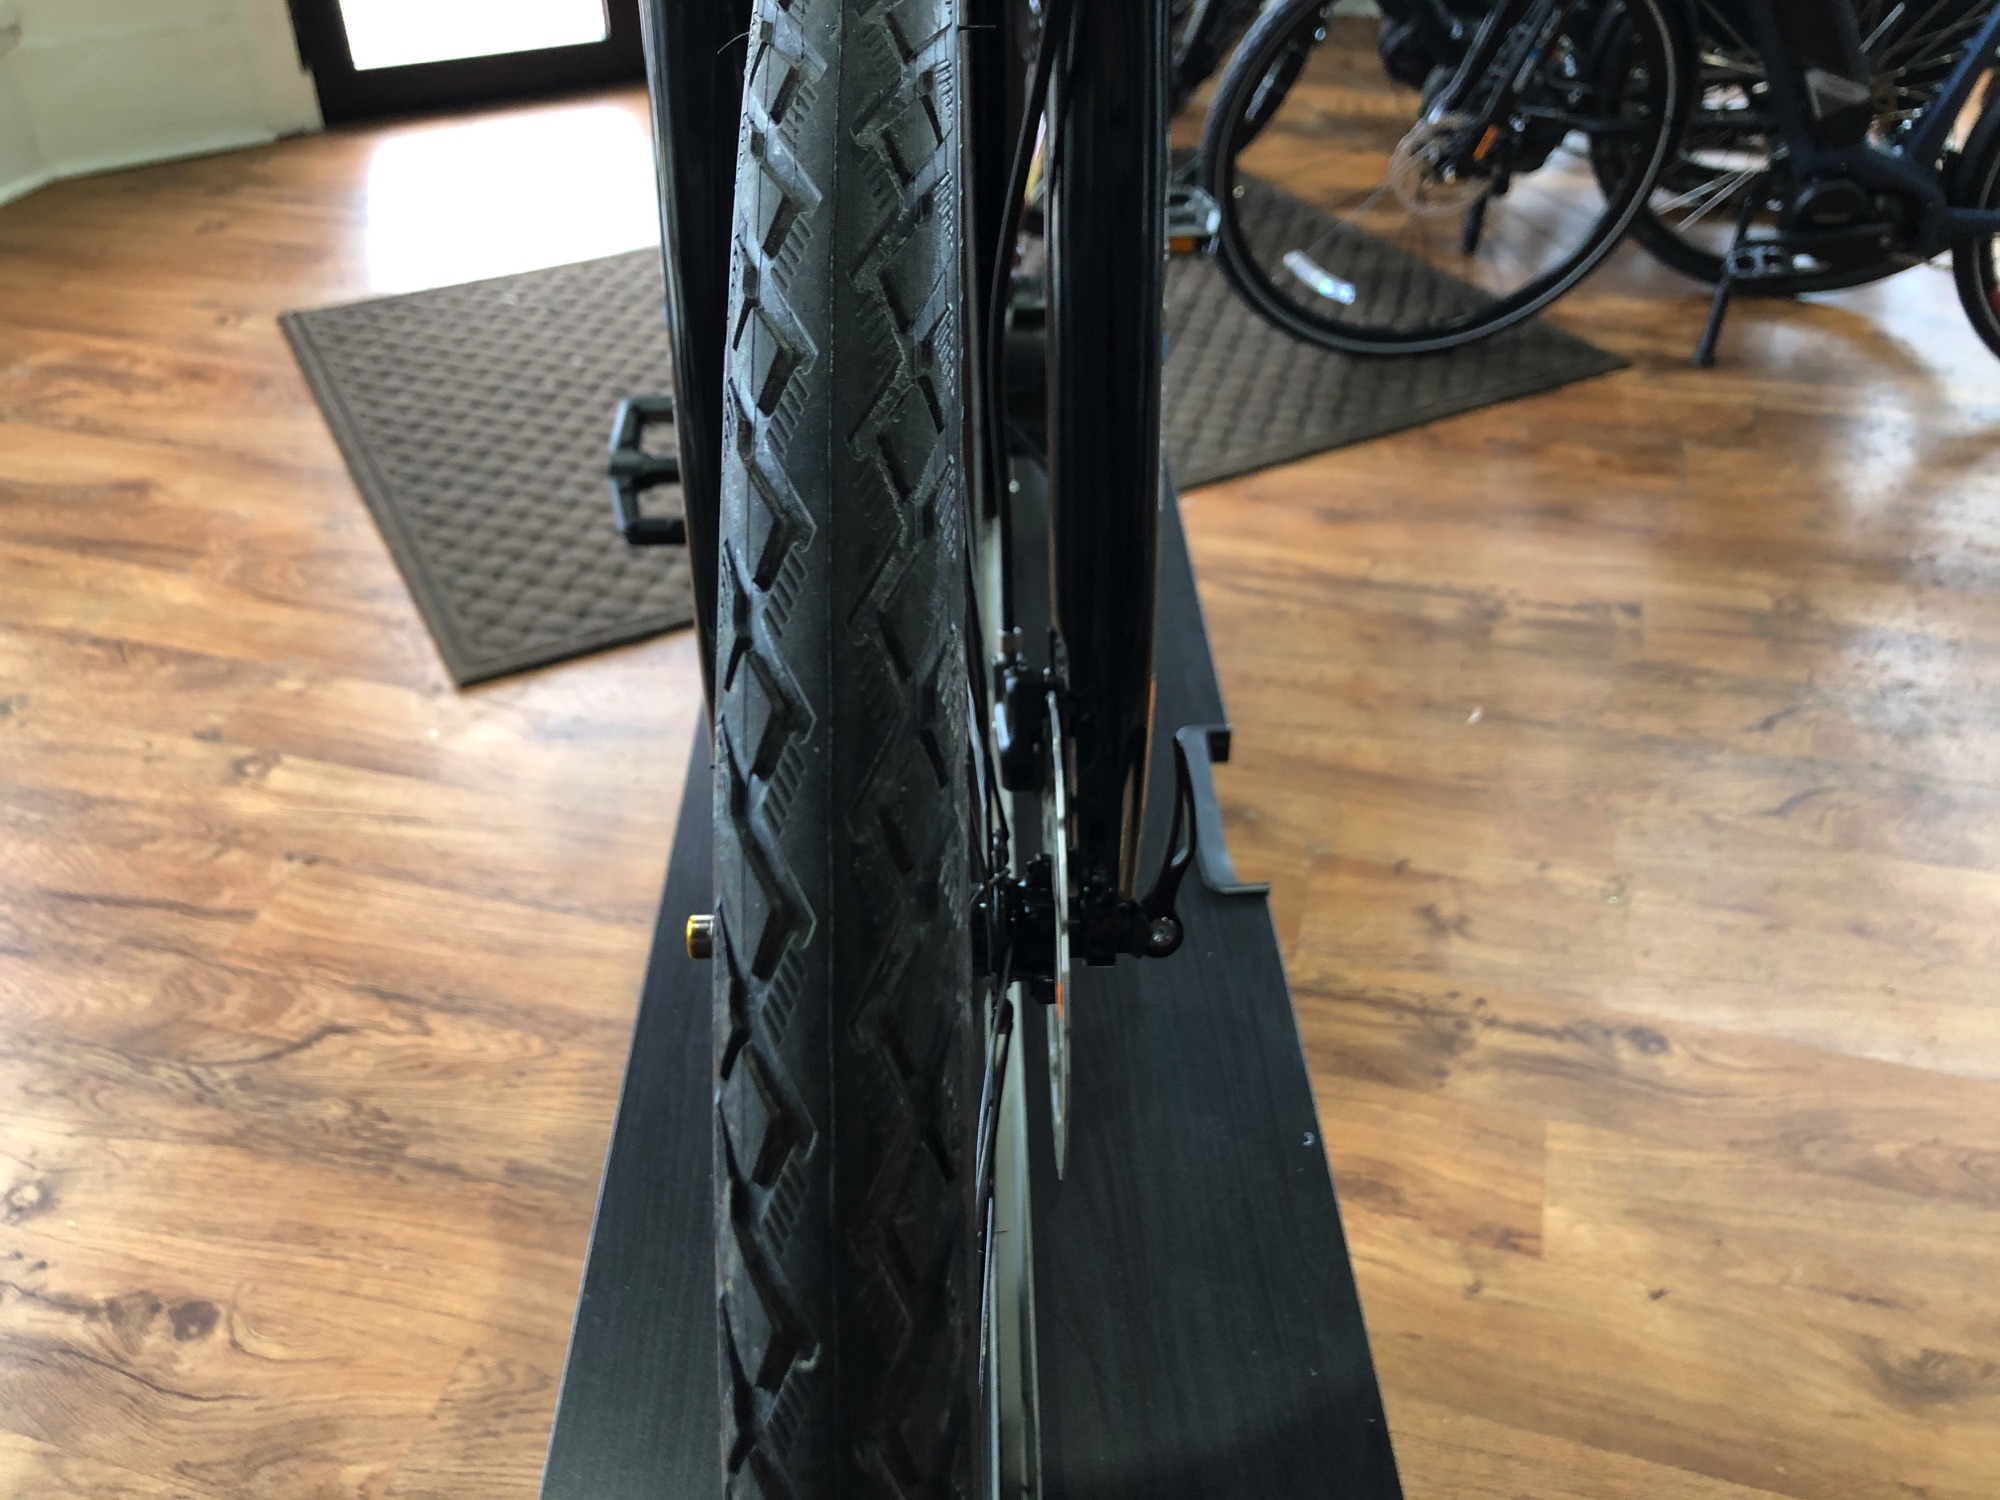 Yamaha CrossConnect Pedal Assist Electric Bicycle